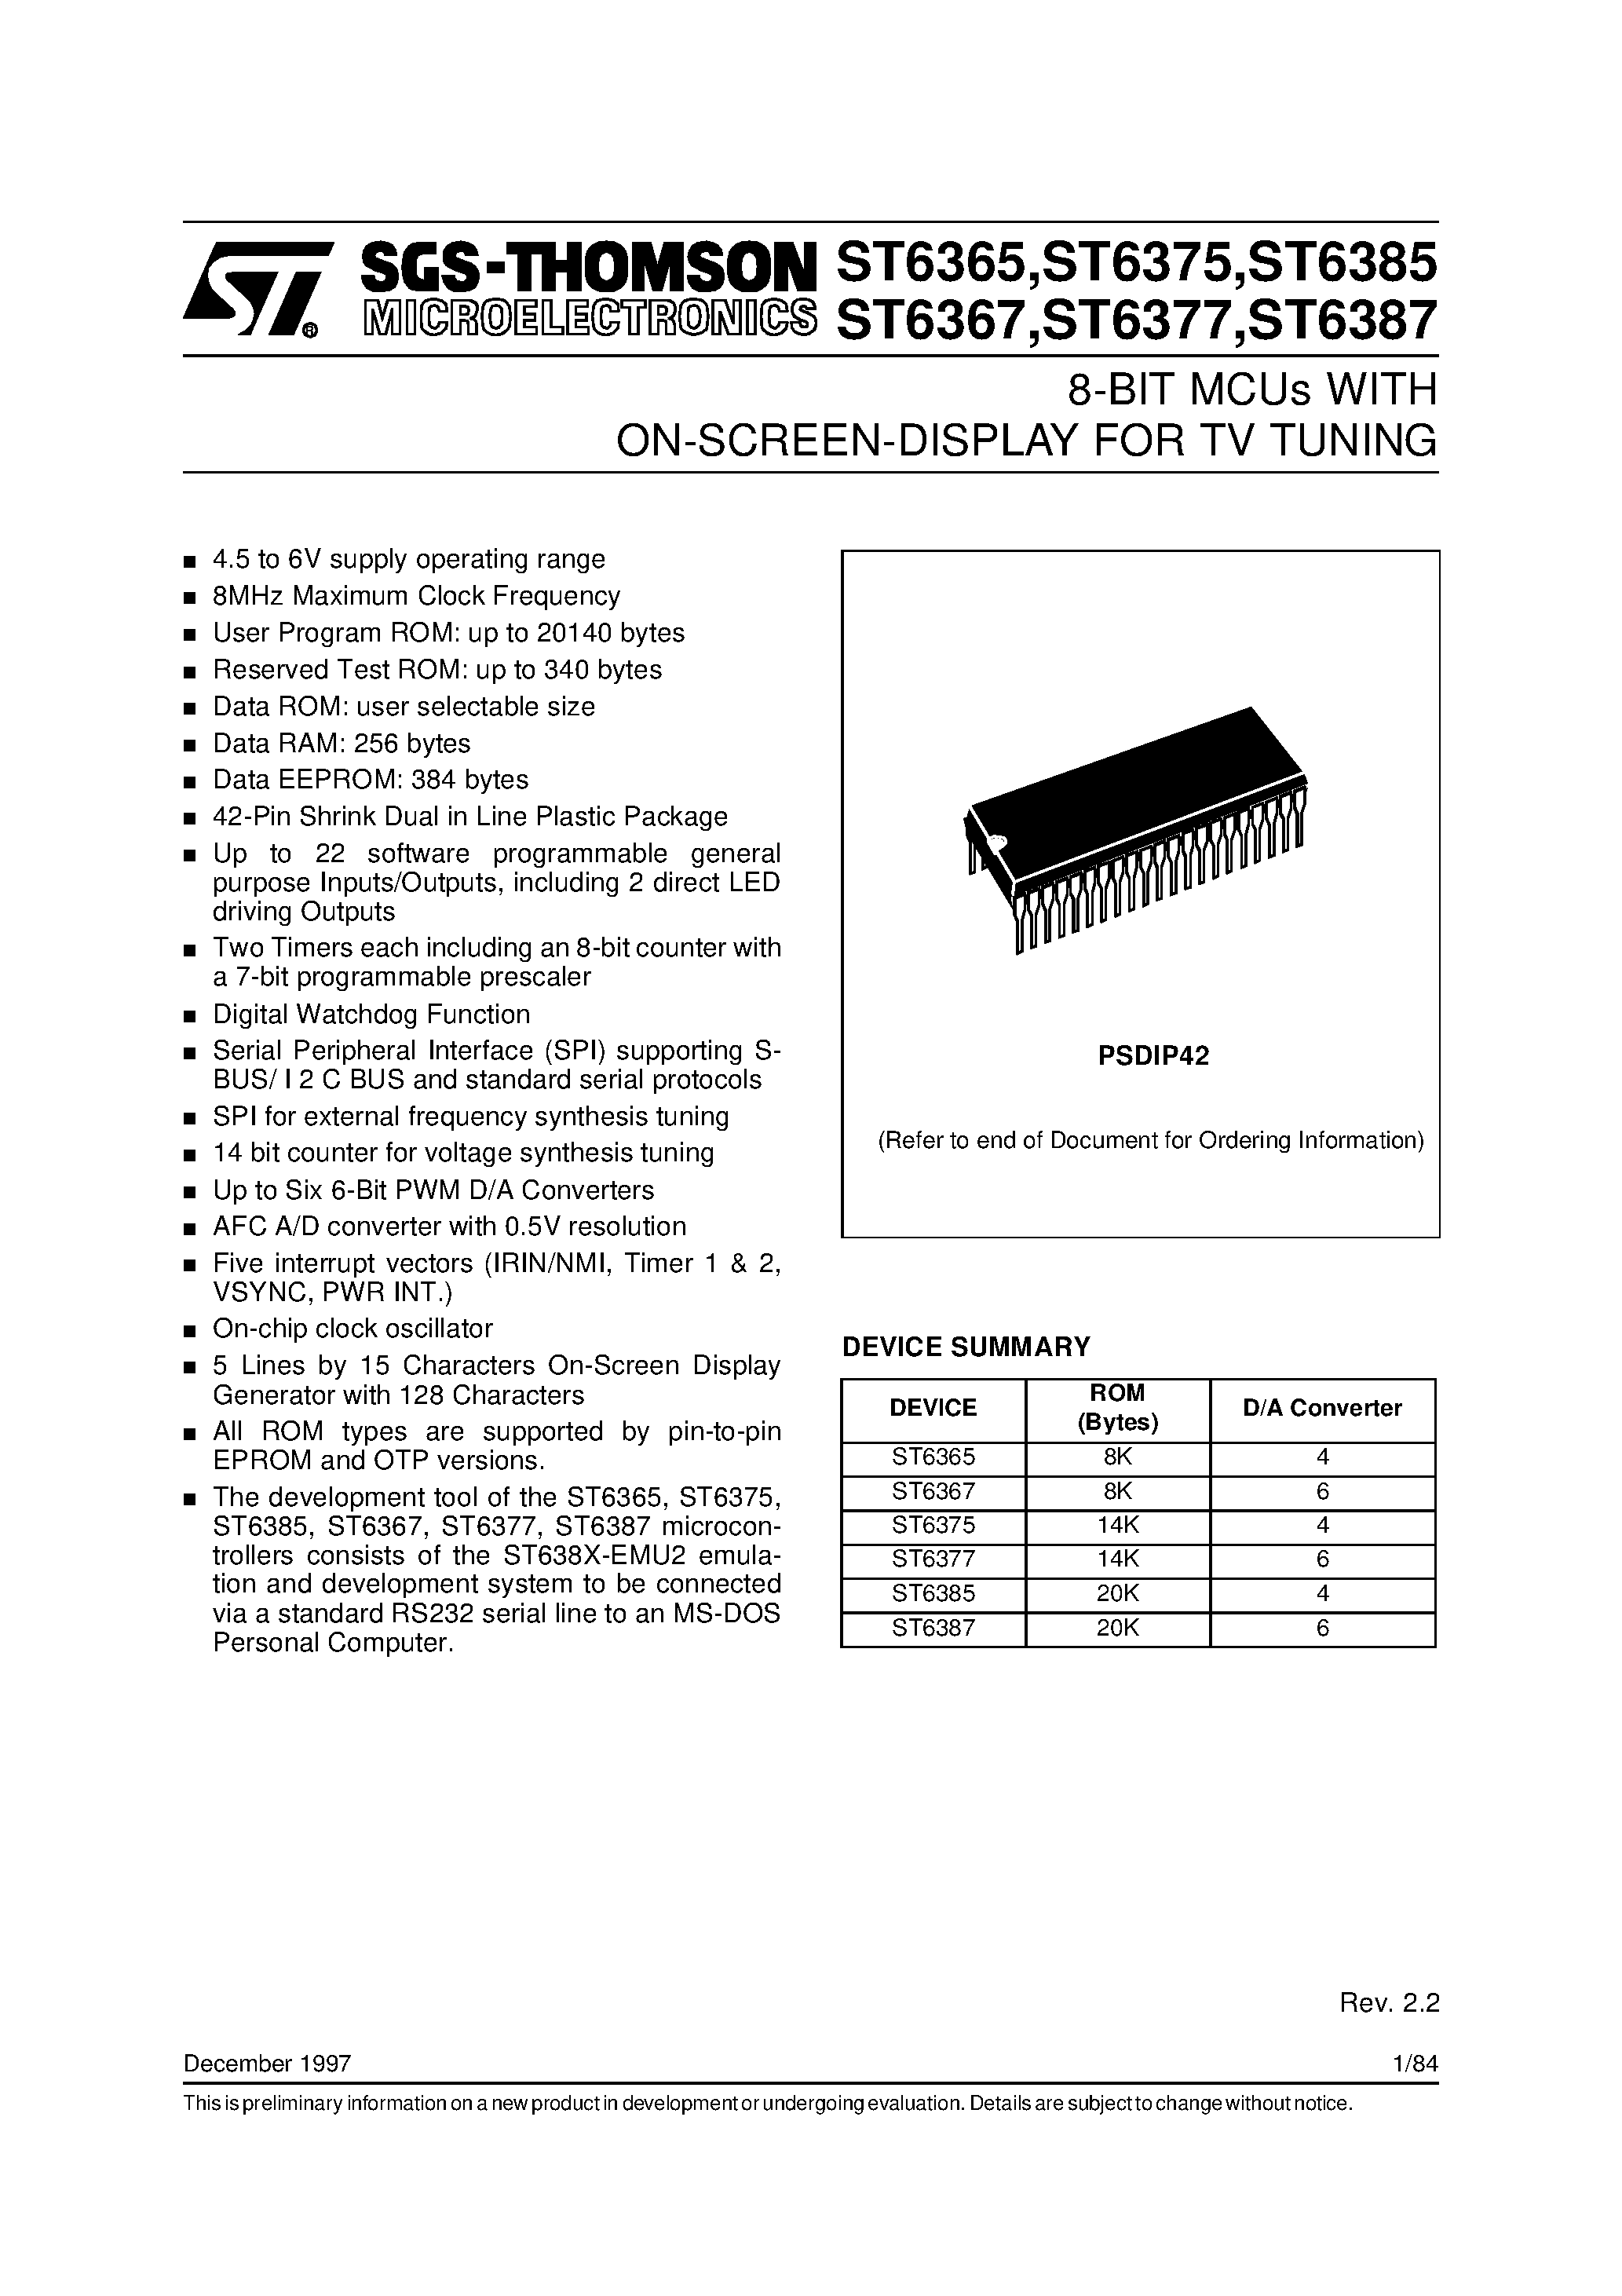 Datasheet ST6387 - 8-BIT MCUs WITH ON-SCREEN-DISPLAY FOR TV TUNING page 1